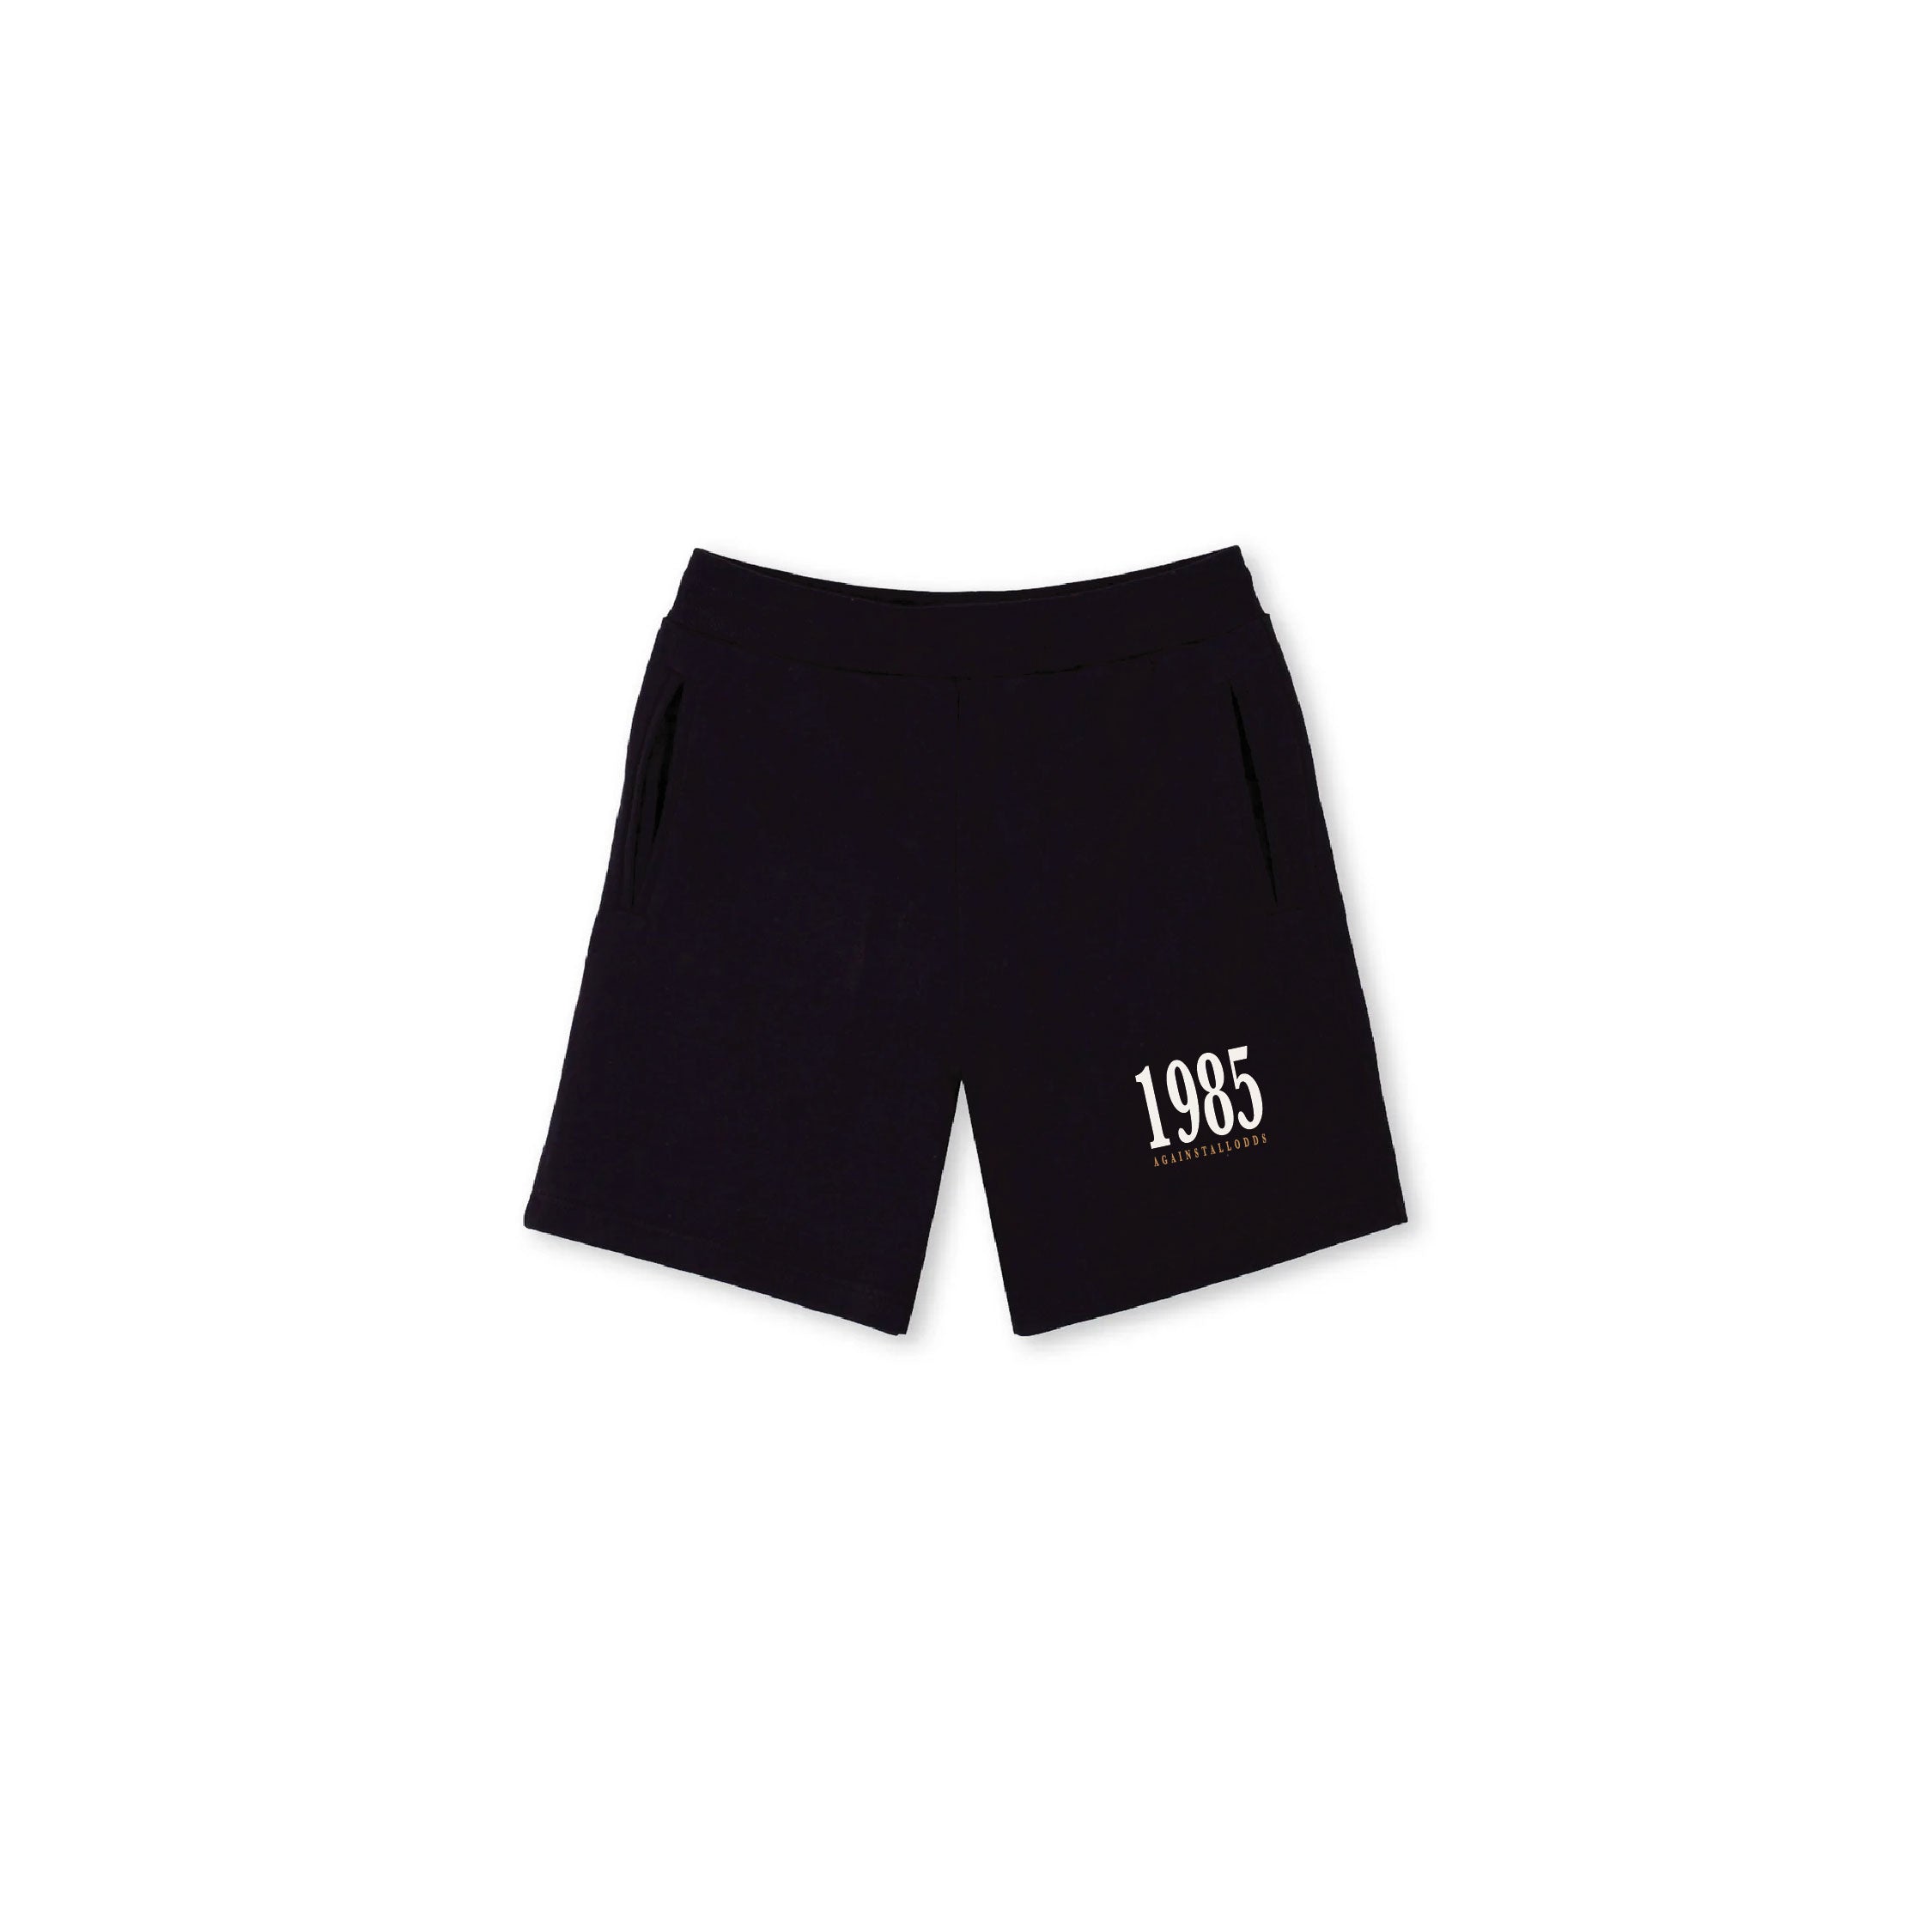 ESTATE OF MIND FRENCH TERRY SHORTS - 1985 - BLACK